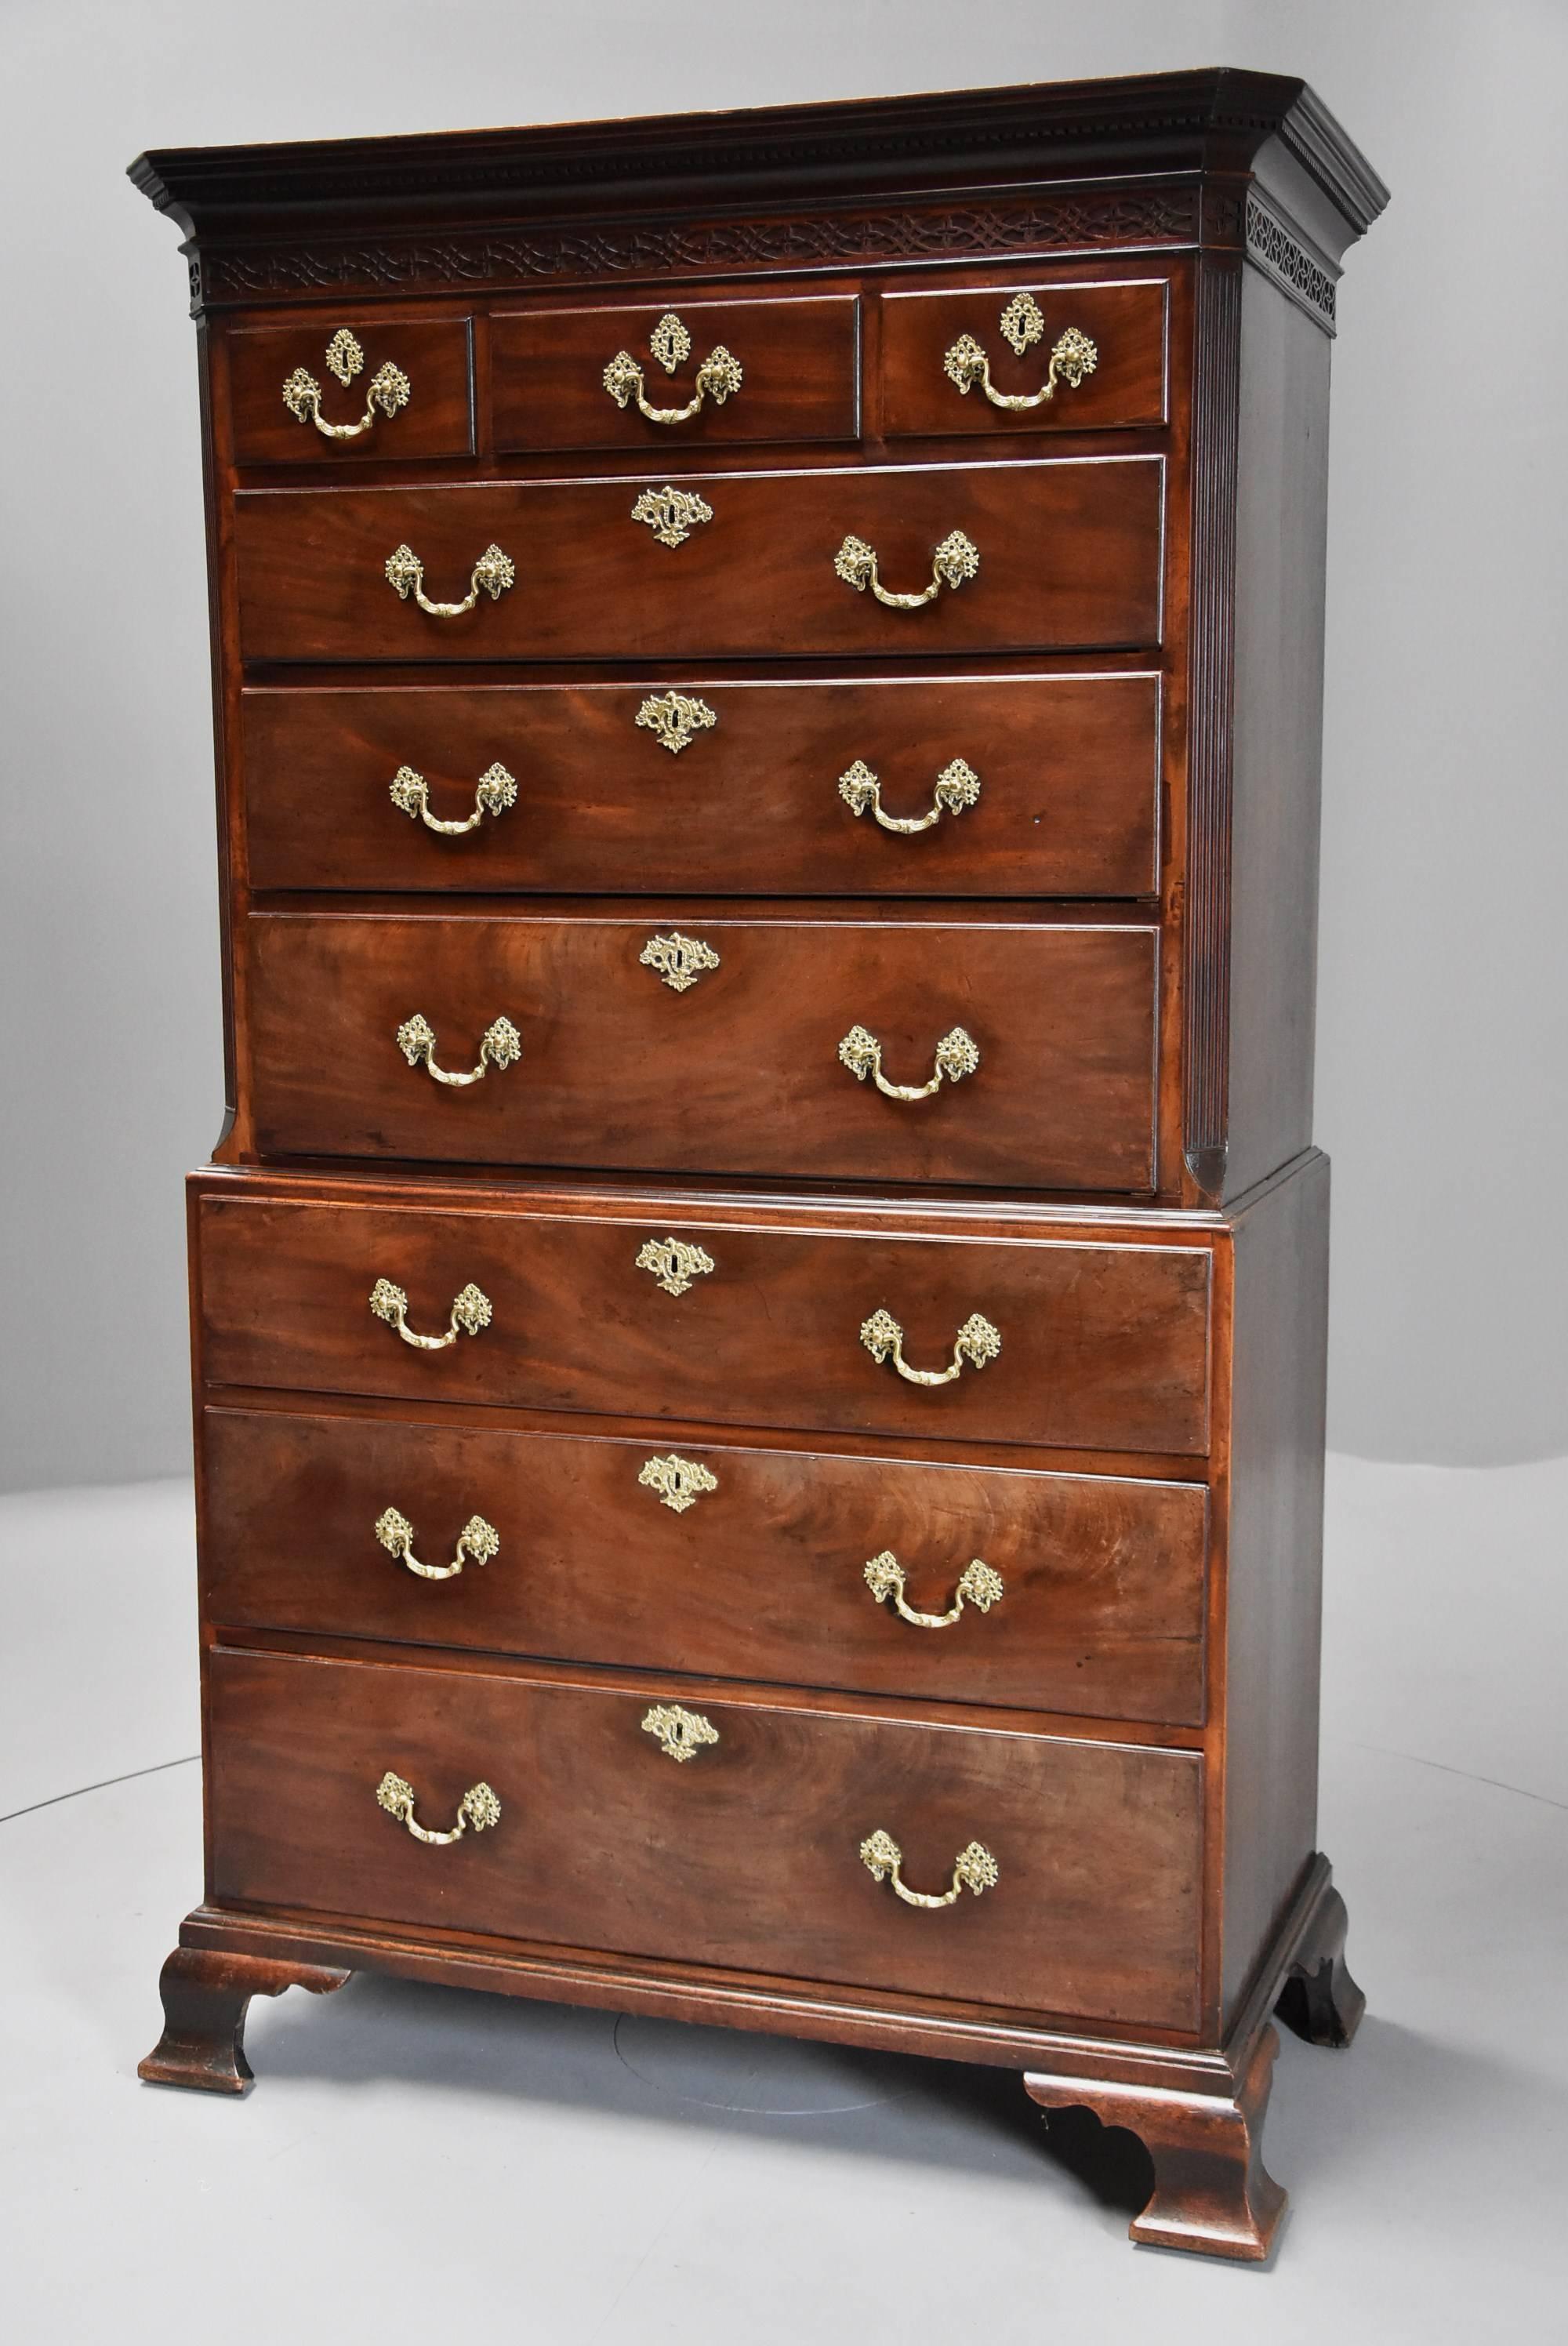 An excellent quality mid-18th century mahogany chest on chest with superb original patina.

This chest on chest consists of a moulded cornice to the top with canted corners and dental moulding with a blind fret decoration below, this leads down to